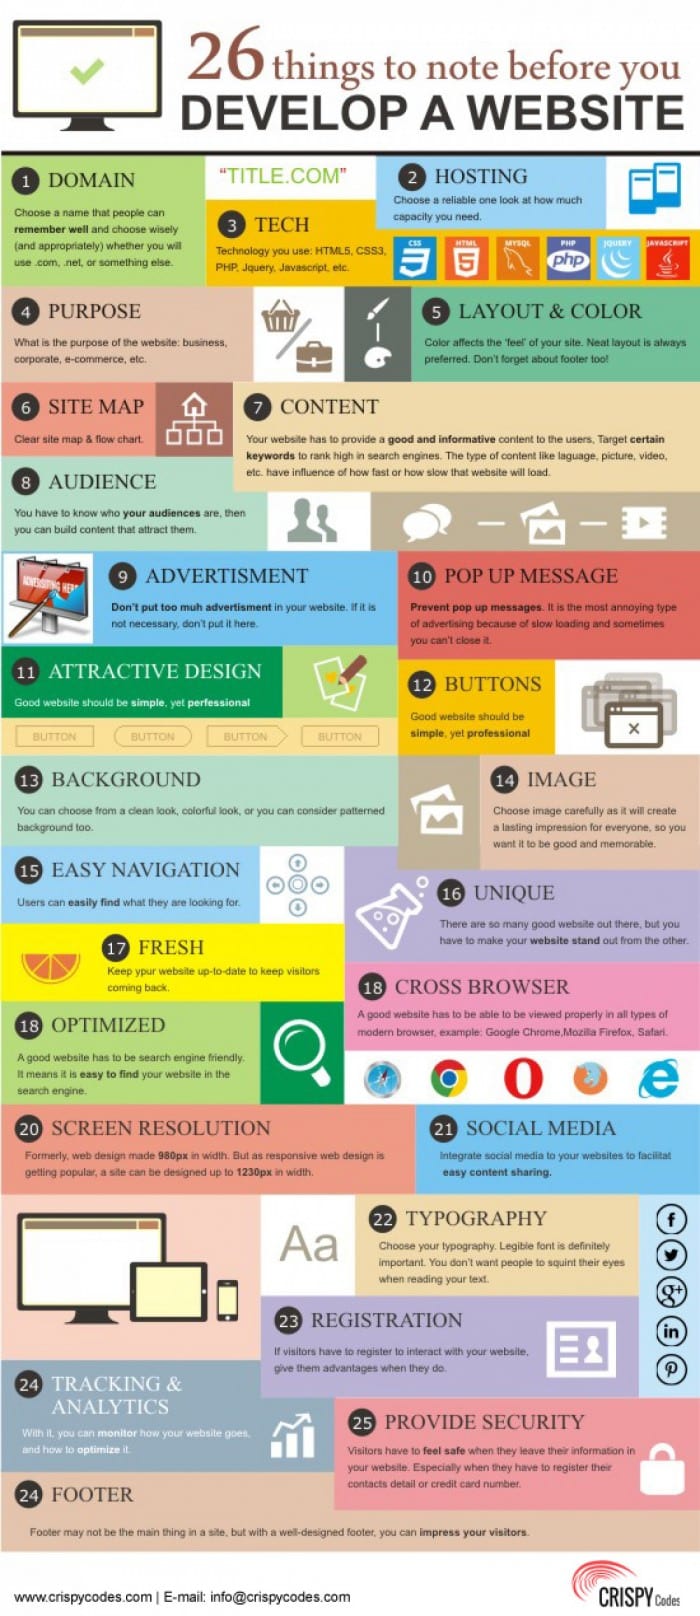 26-things-to-note-before-you-develop-a-website_53d255c081c5c_w1500